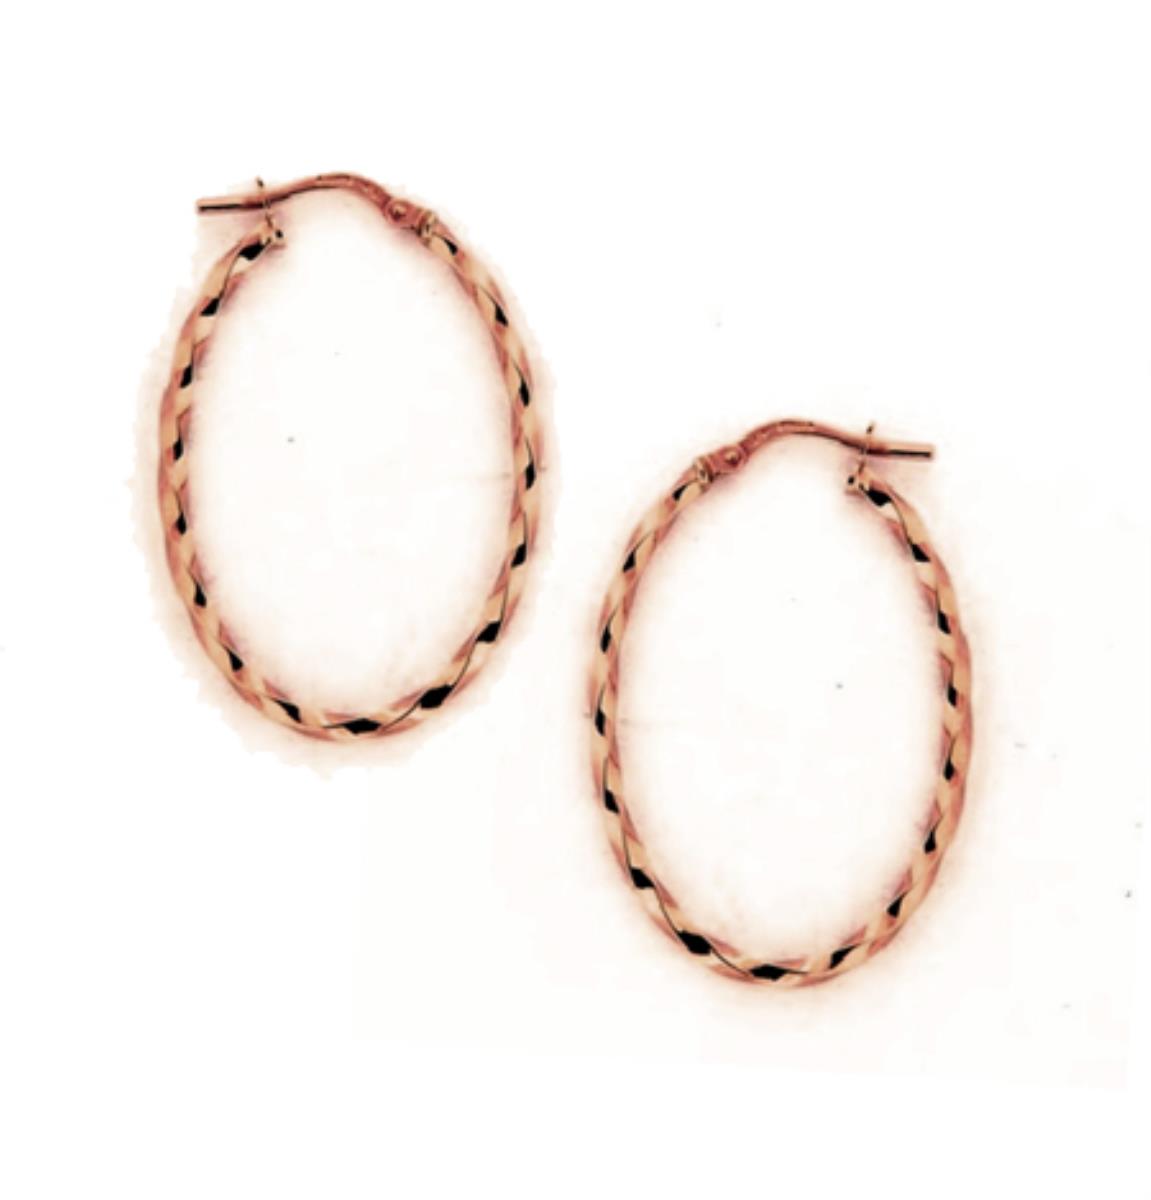 9K Rose Gold Tight Twisted Oval Hoop Earring